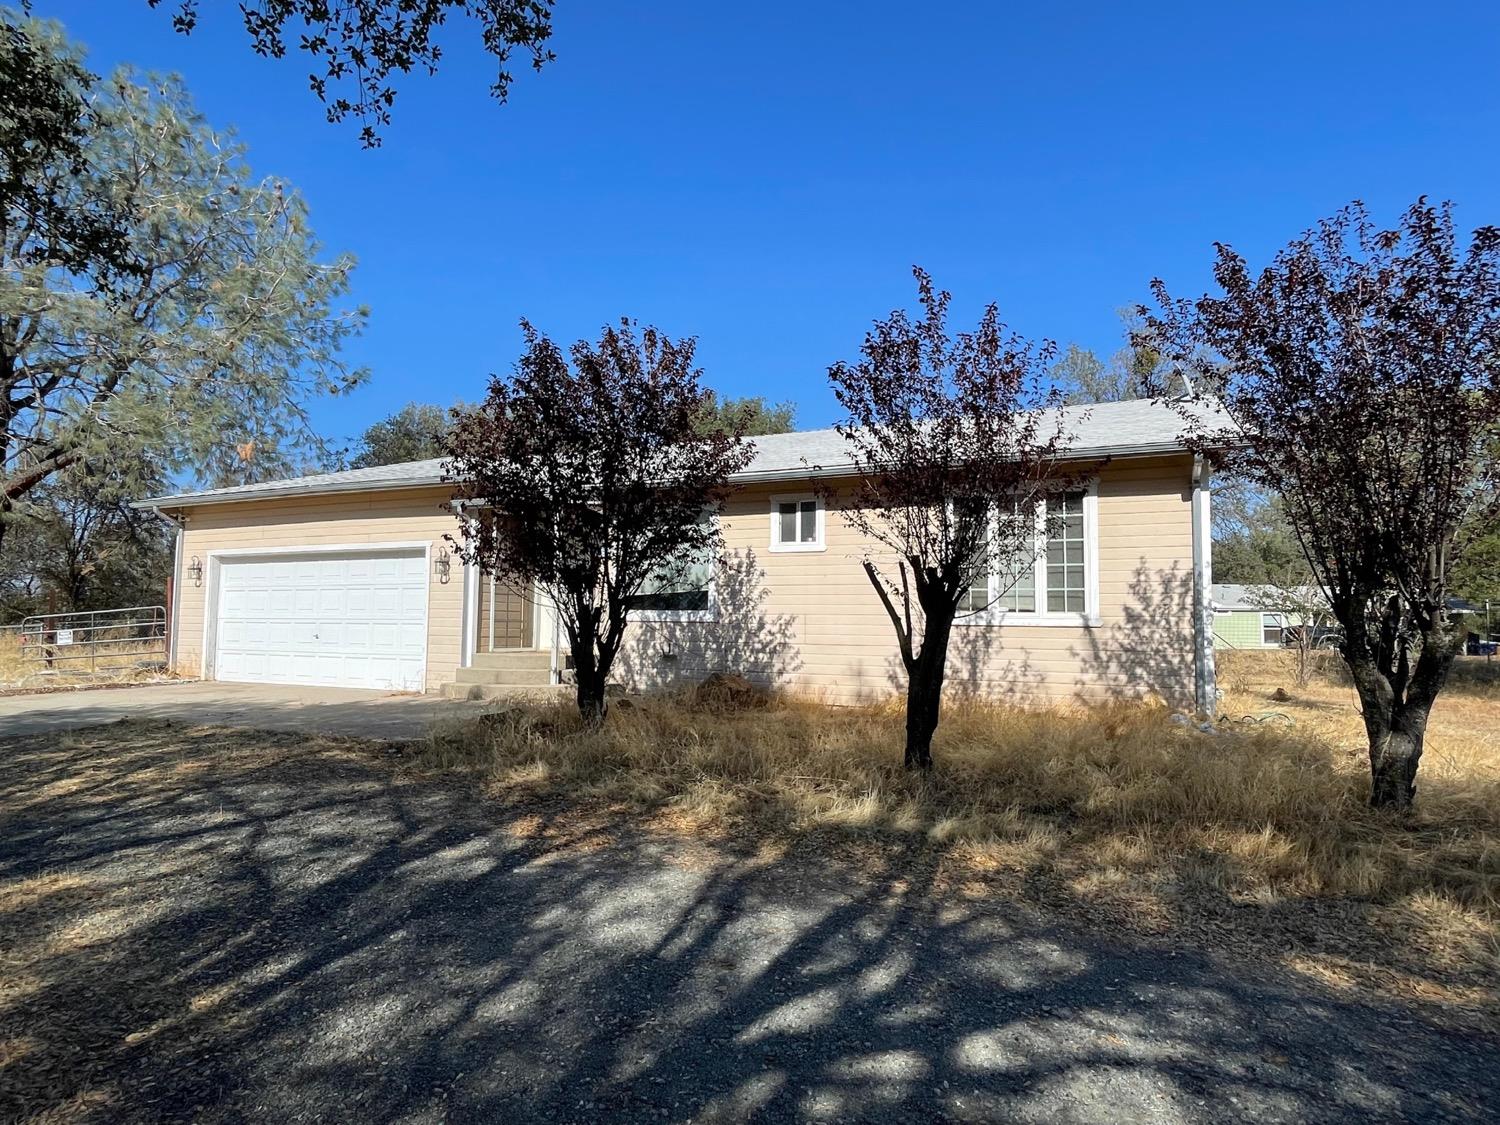 3351 Maravilla Dr, Coulterville, CA 95311 - MLS 222132158 - Coldwell Banker